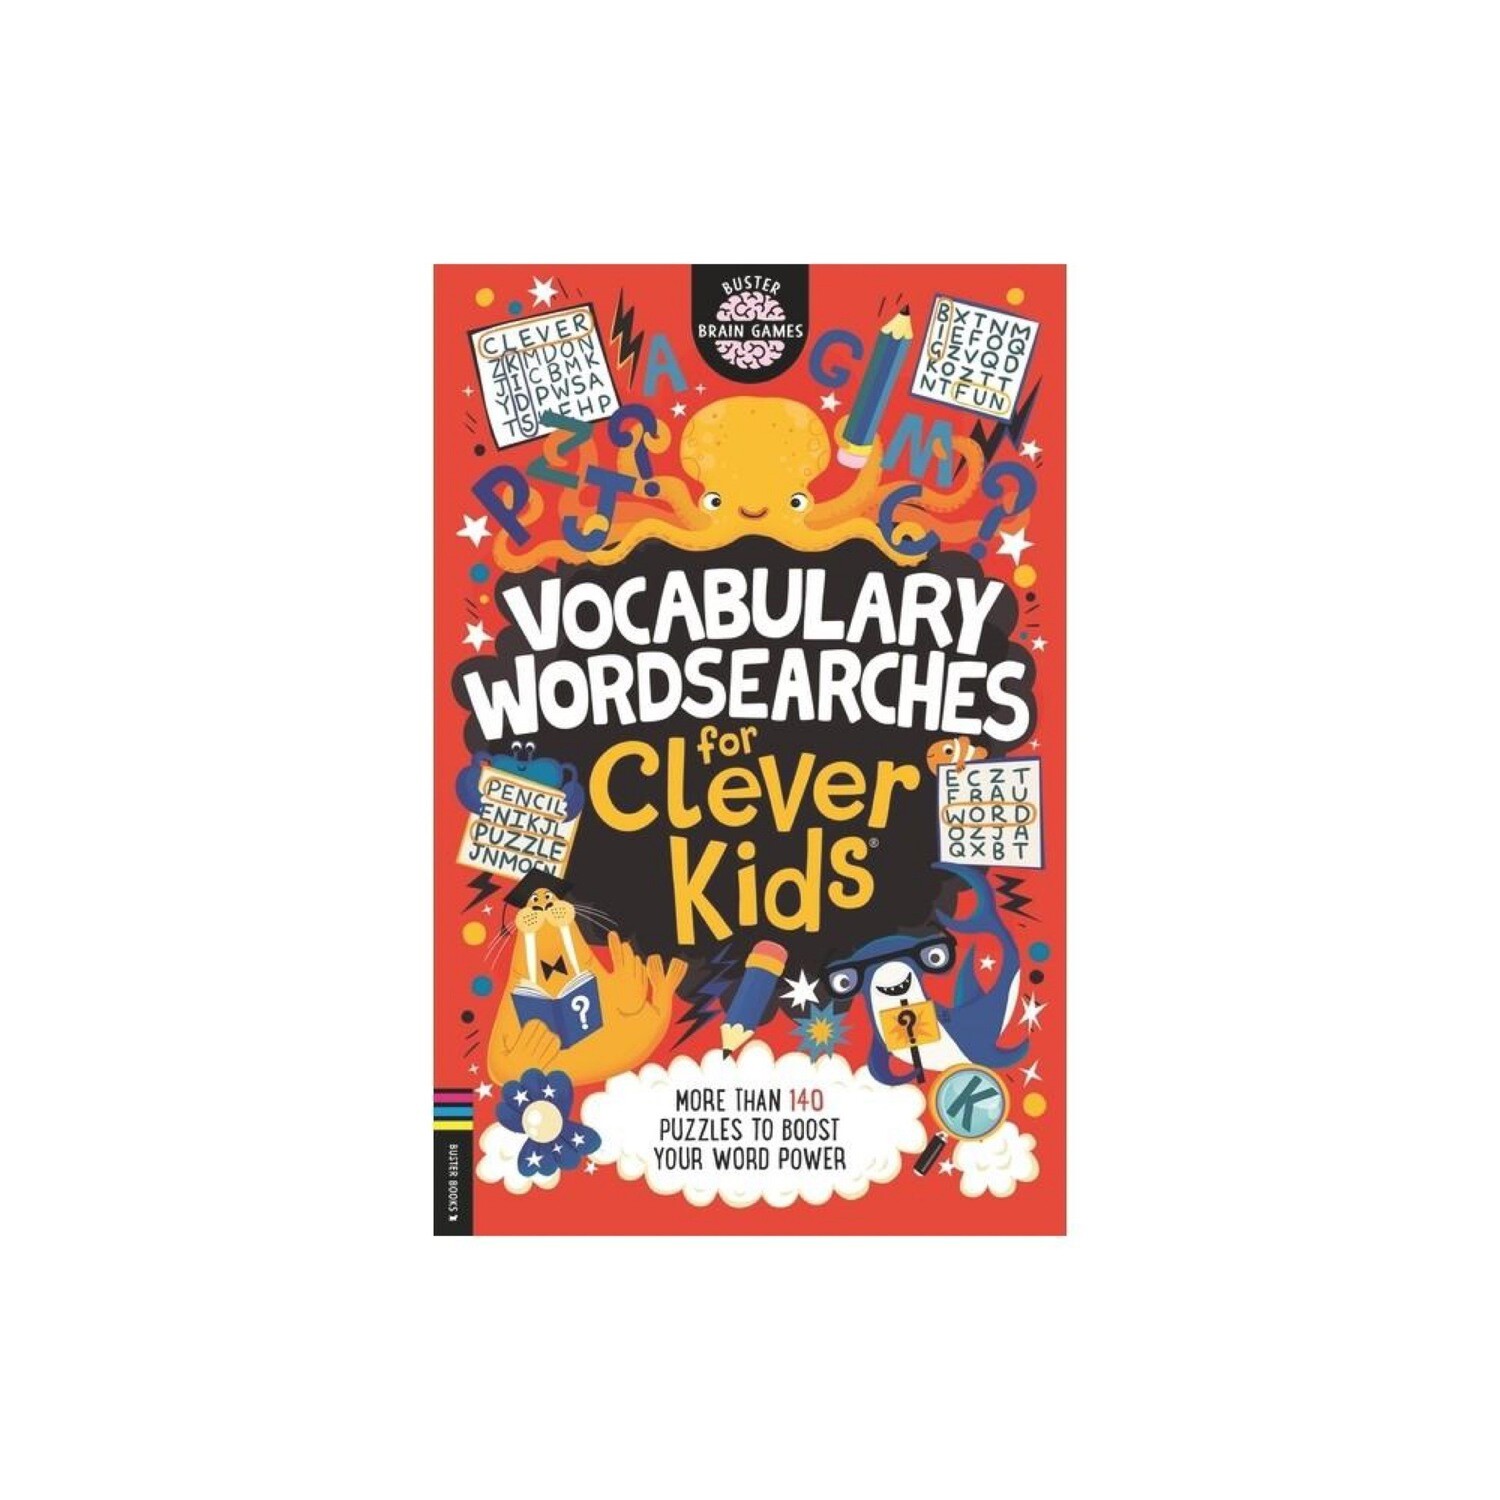 Vocabulary Wordsearches for Clever Kids(R)